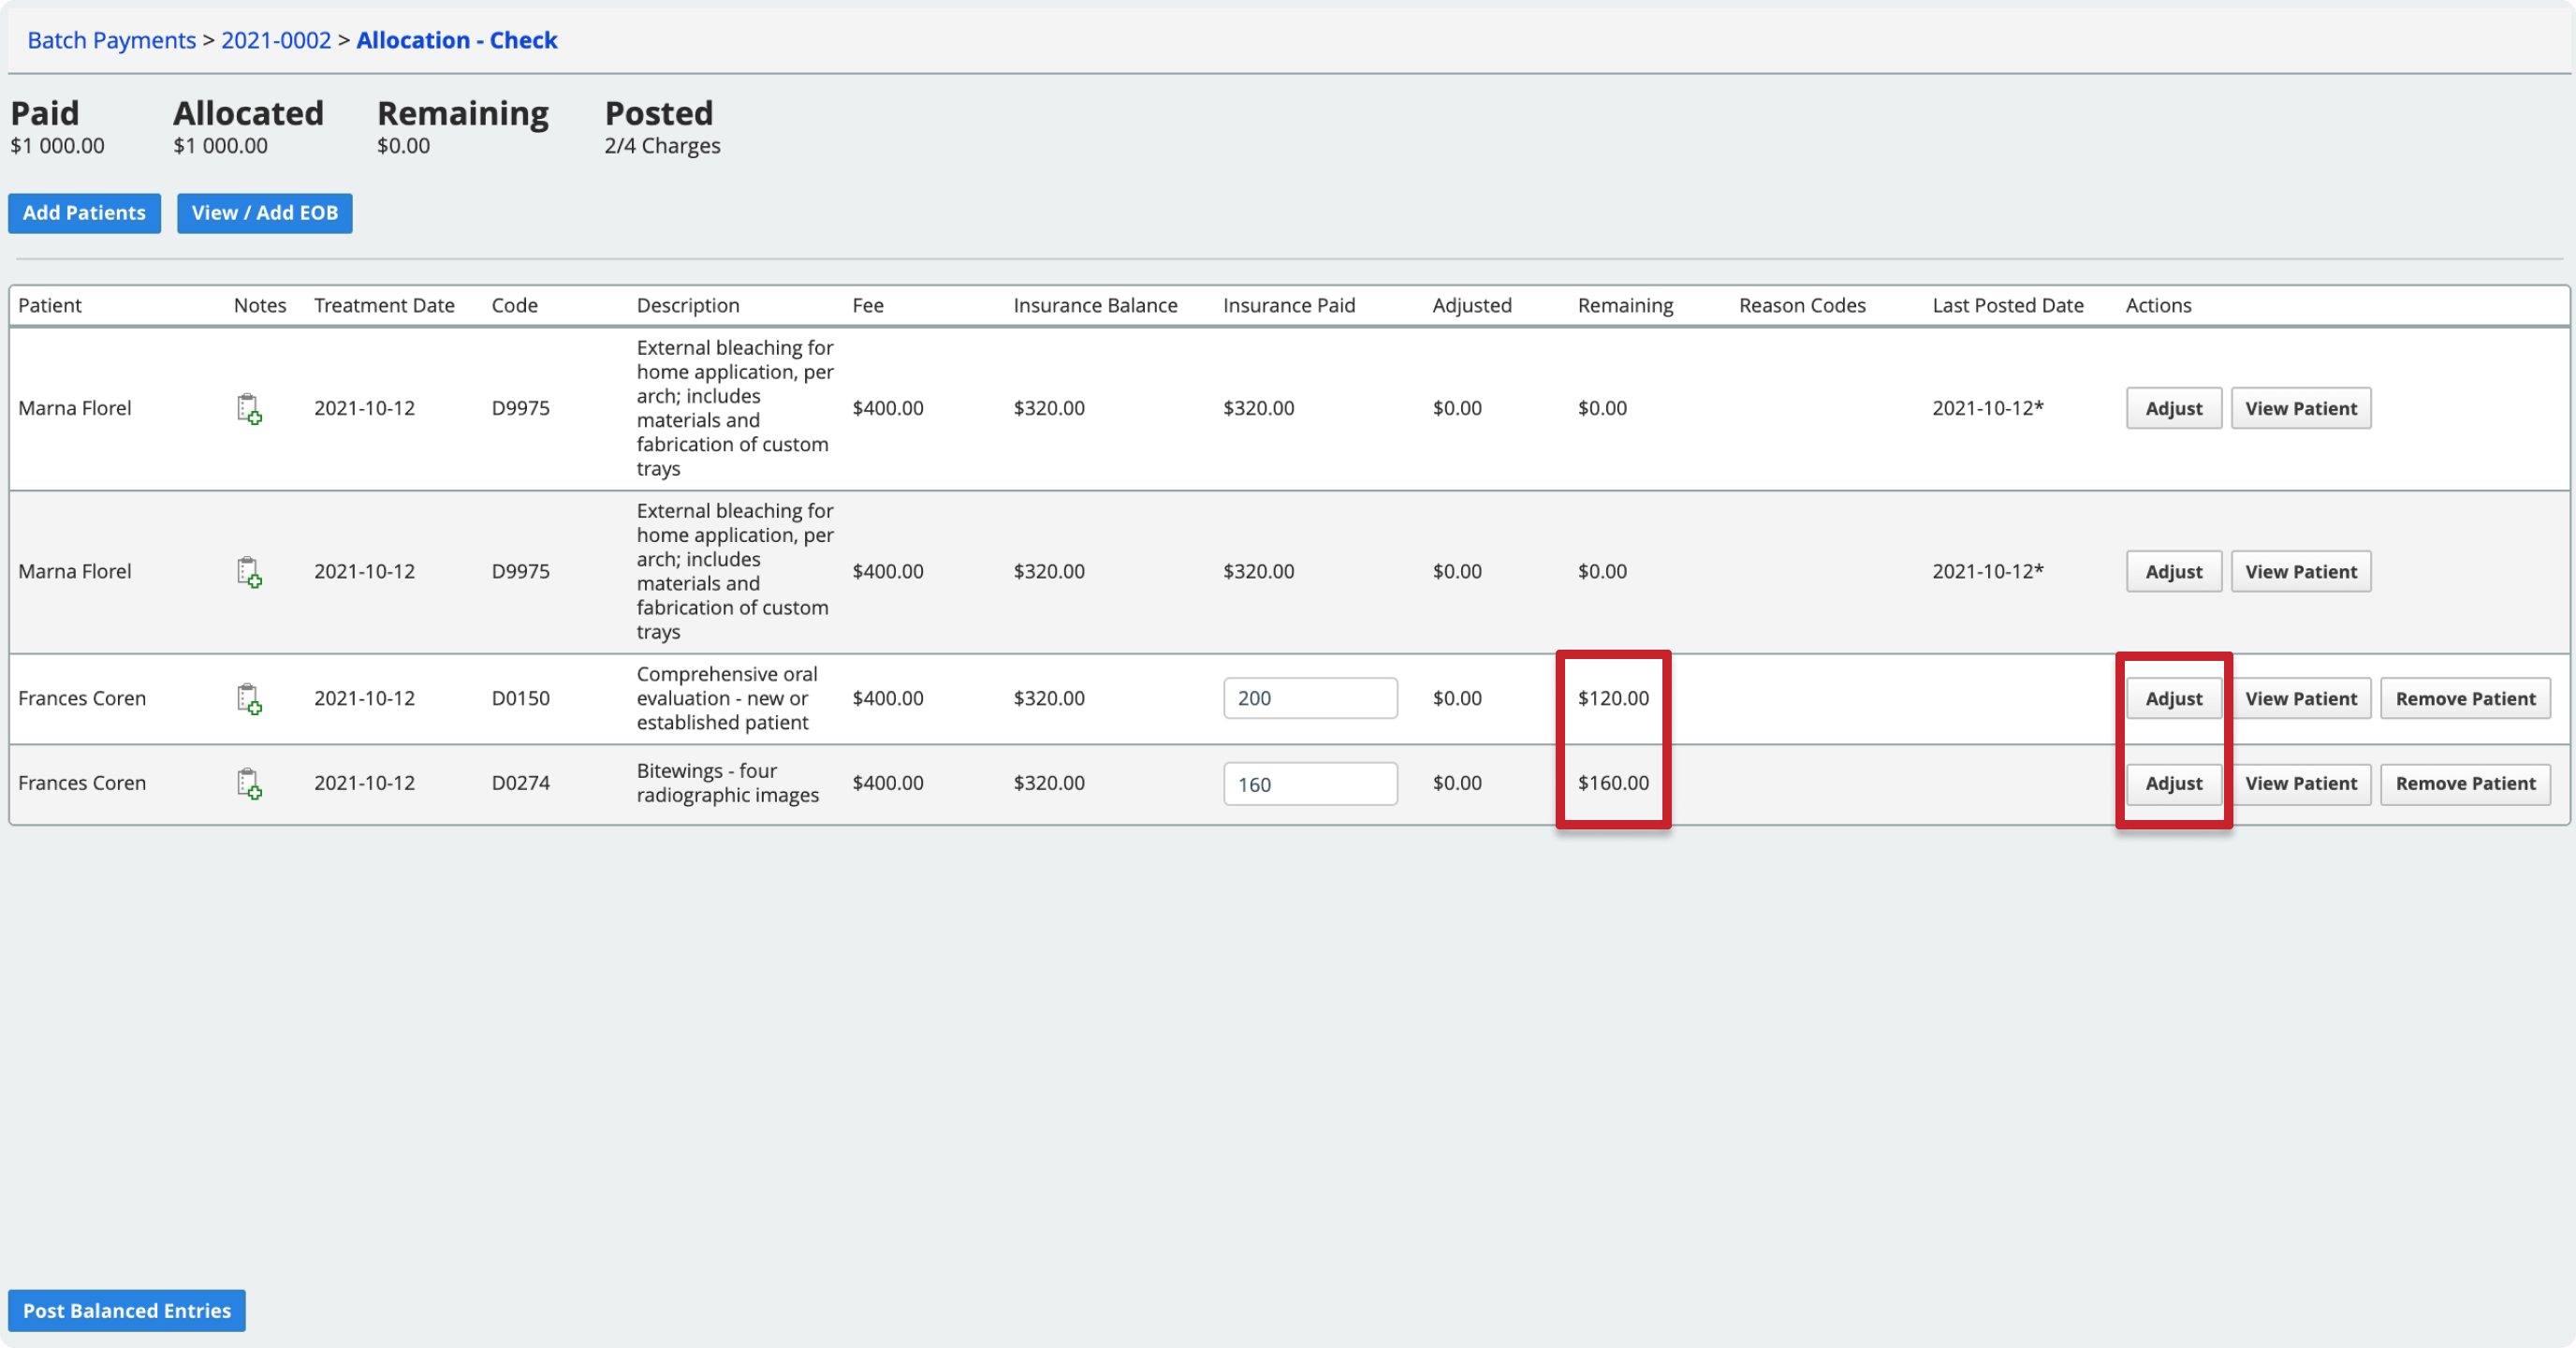 The Adjust button is on the far right of the table for each payment line. To find underpaid lines that need to be adjusted, look for remaining amounts larger than zero.